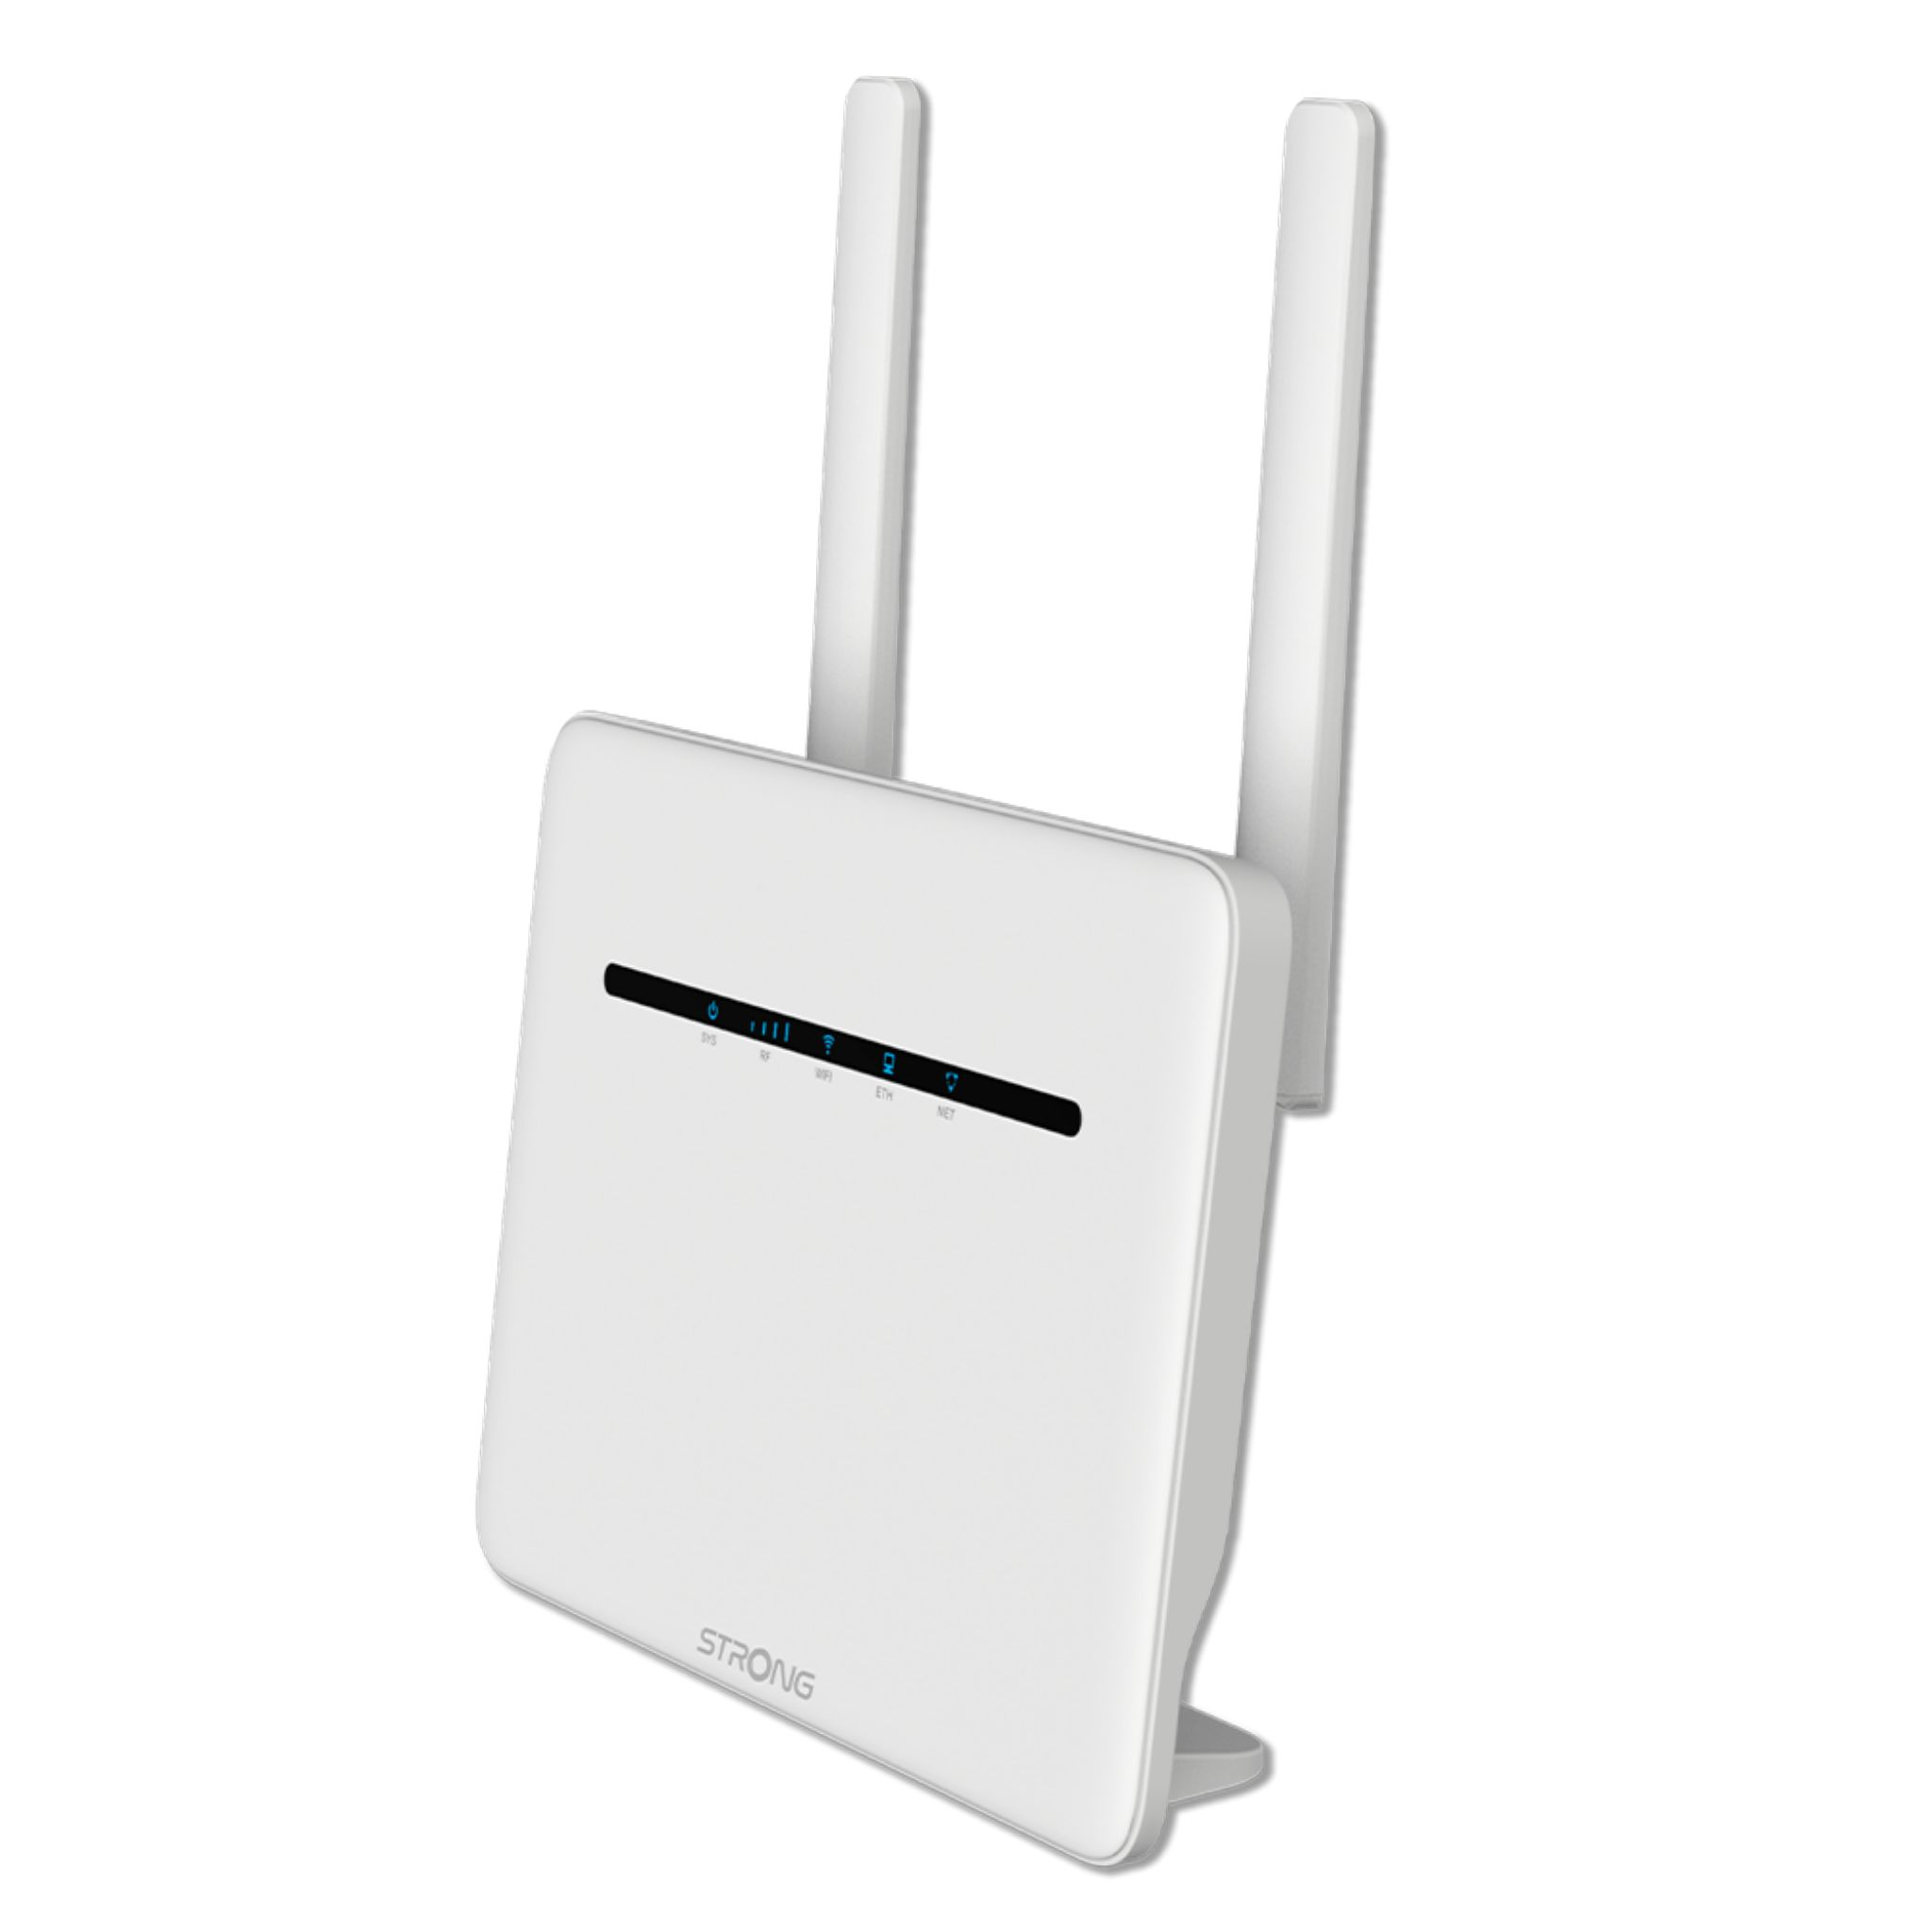 Router 4G+ 1200 STRONG